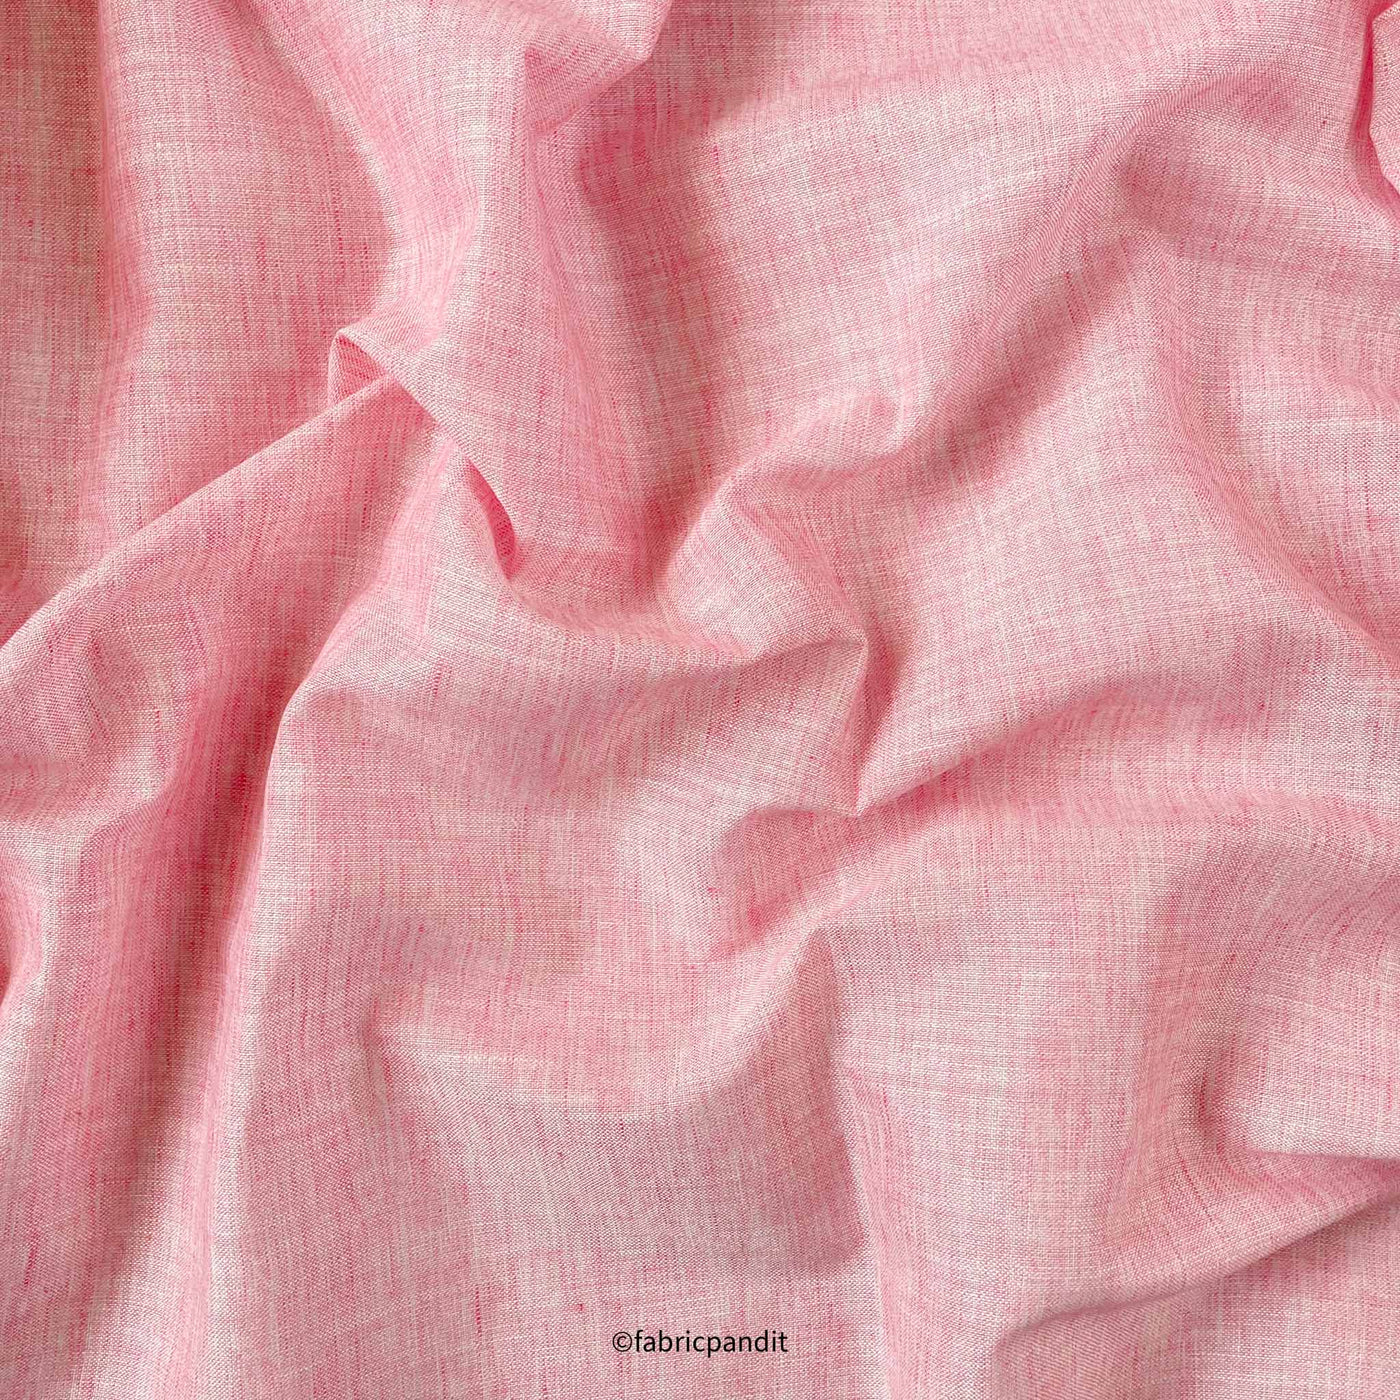 Fabric Pandit Cut Piece (CUT PIECE) Men's Blooming Pink Textured Yarn Dyed Linen Shirting Fabric (Width 58 Inches)